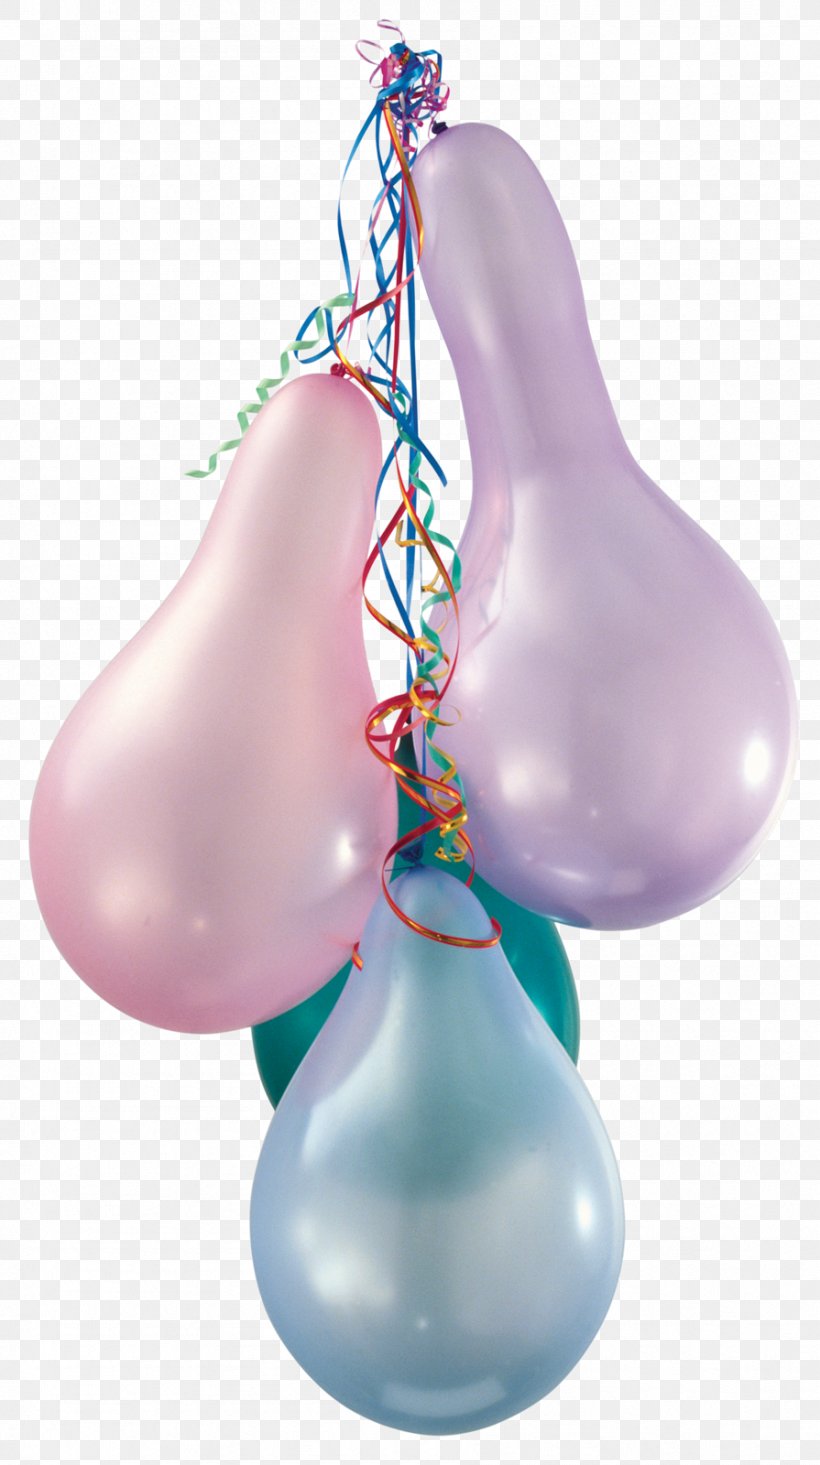 Balloon Holiday Clip Art, PNG, 895x1600px, Balloon, Christmas, Christmas Ornament, Holiday, Image File Formats Download Free